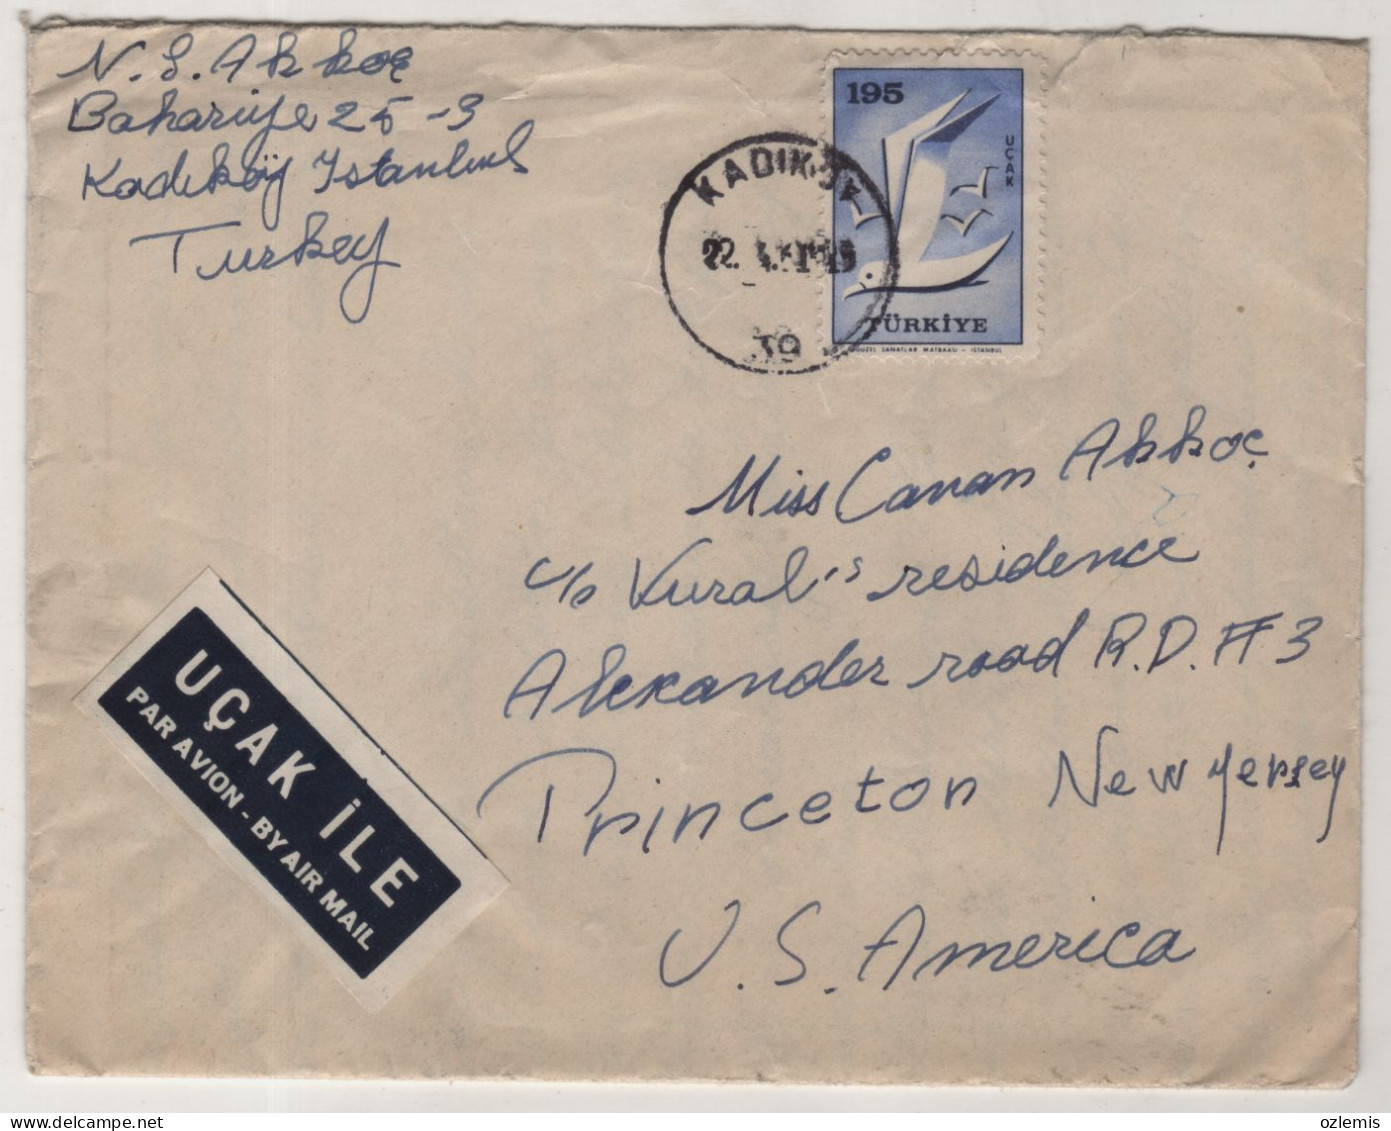 TURKEY,TURKEI,TURQUIE ,ISTANBUL TO USA.NEW JERSEY,1961 COVER - Lettres & Documents